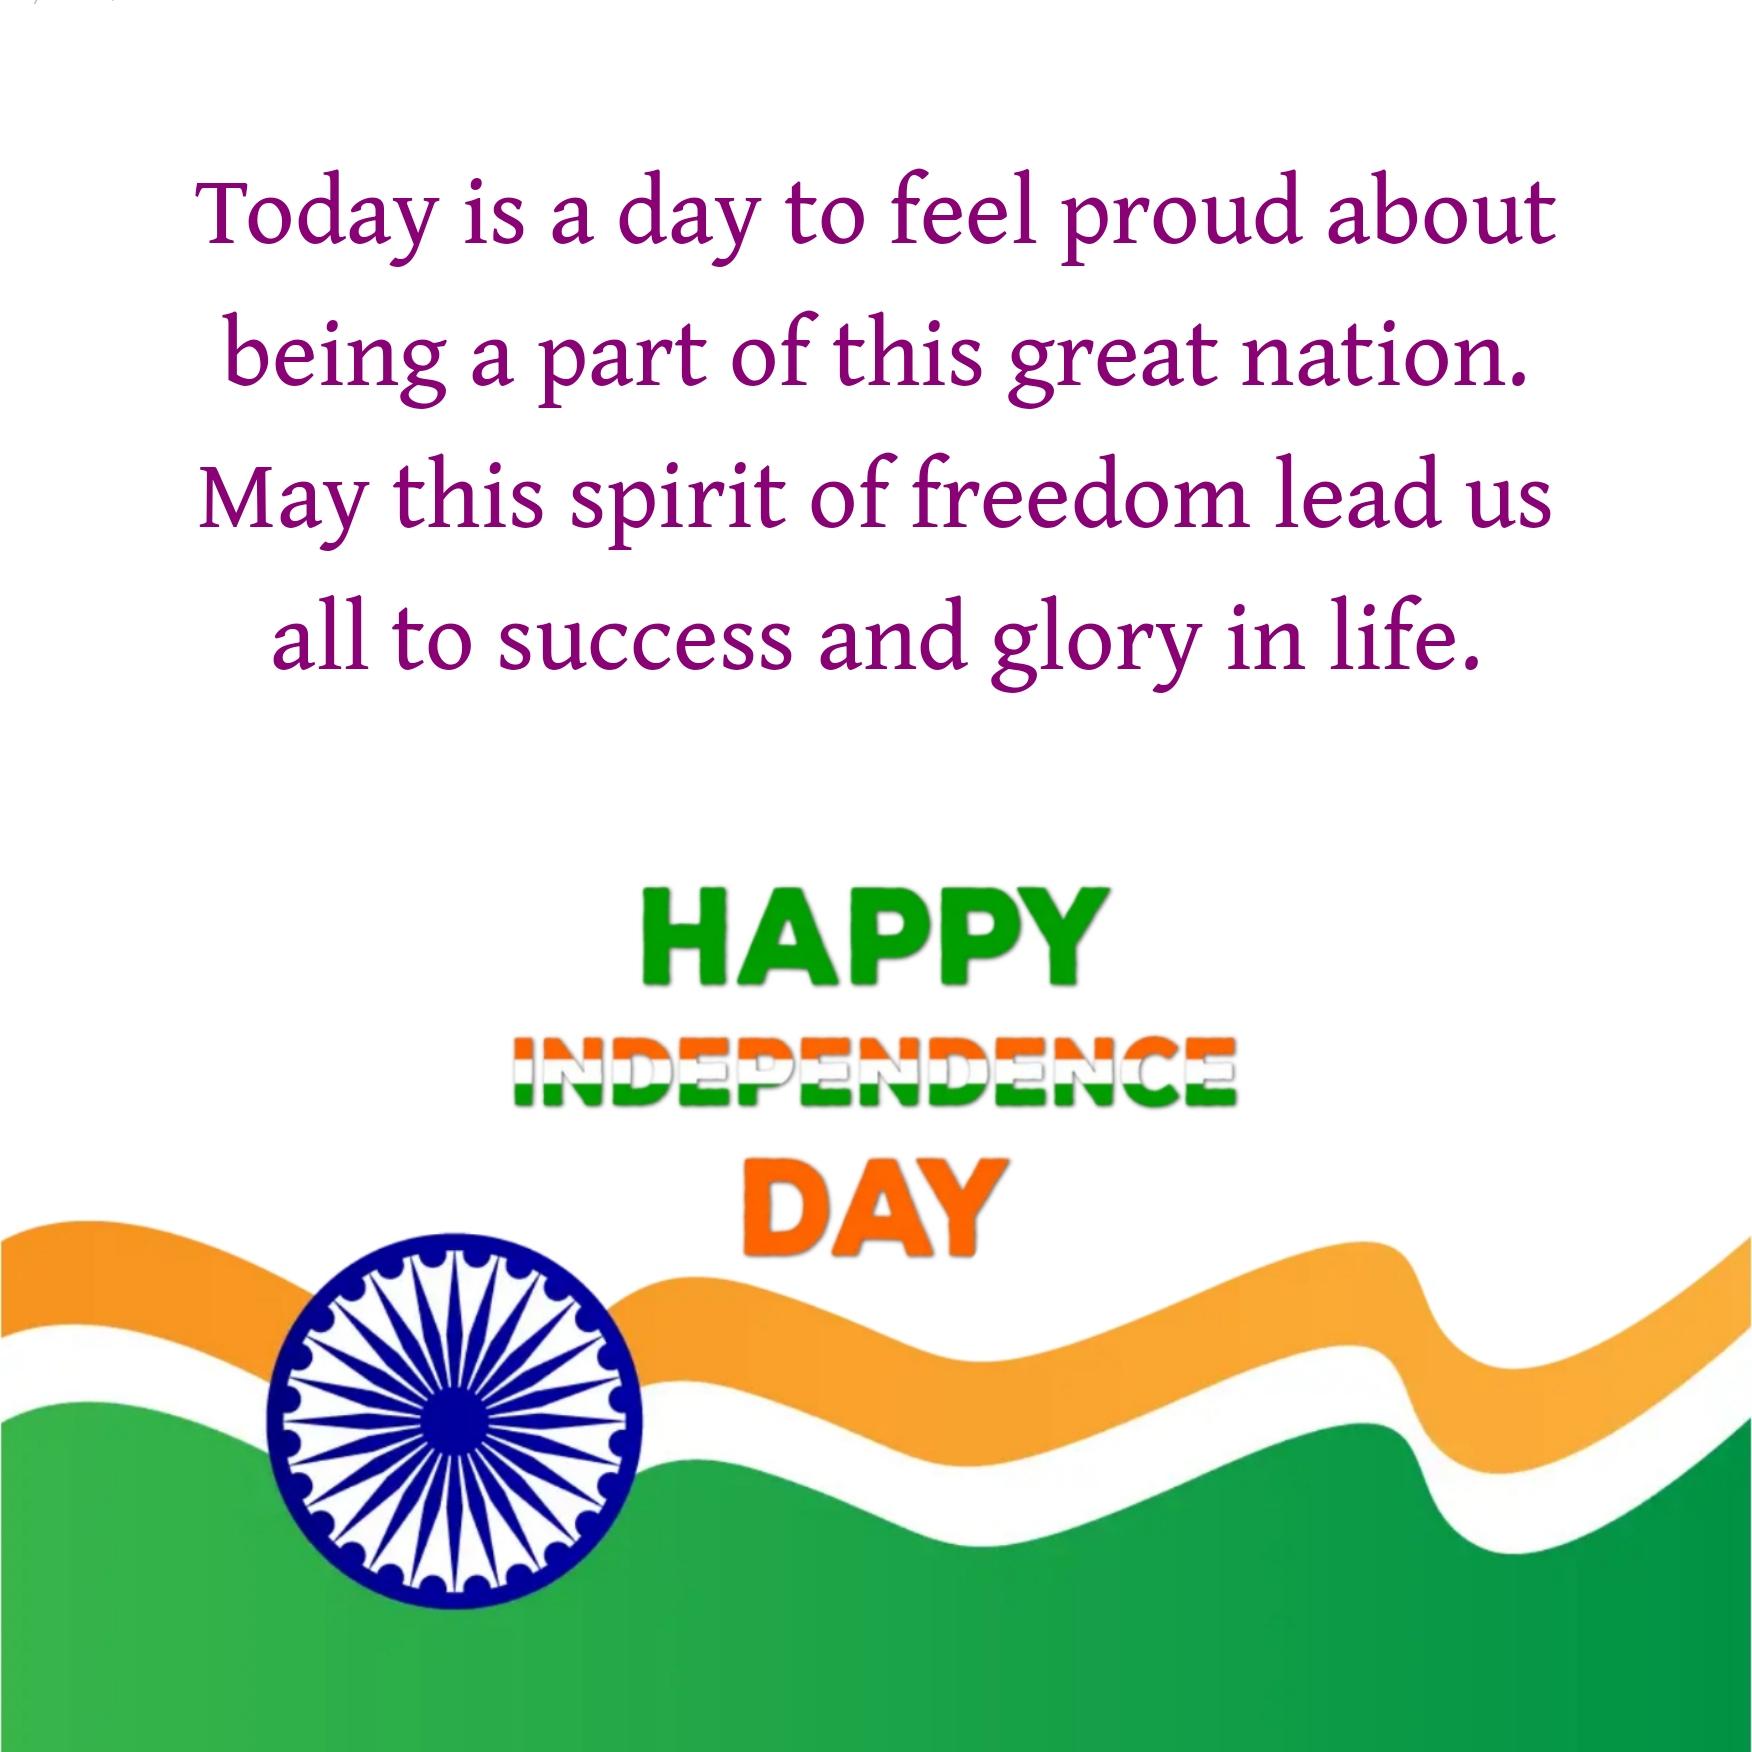 Today is a day to feel proud about being a part of this great nation